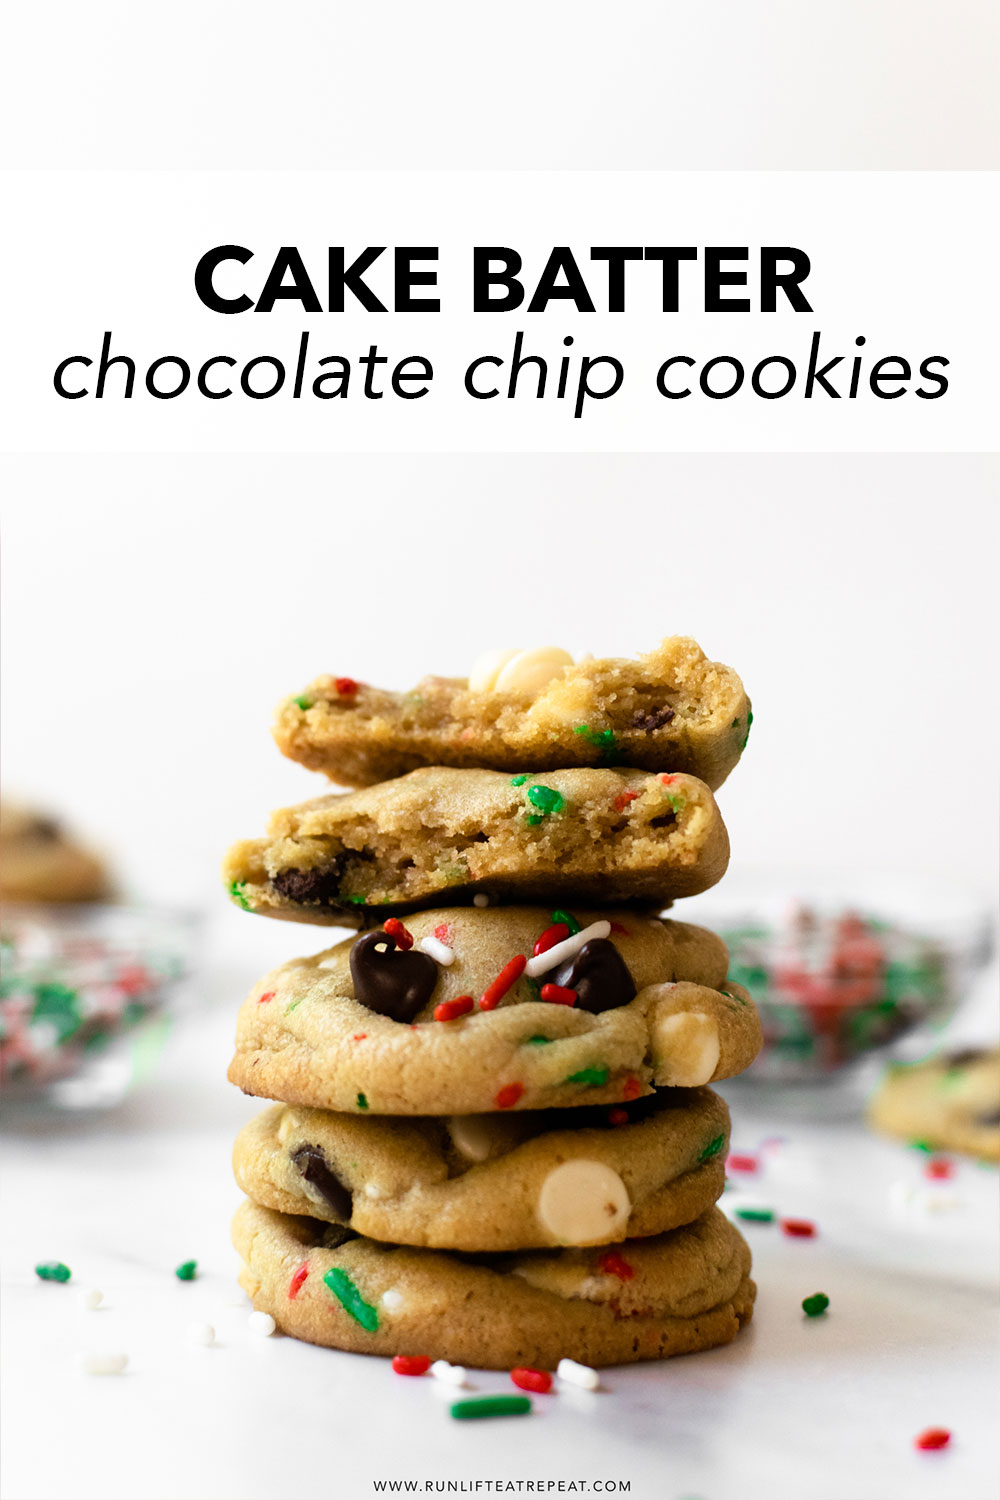 I'm certain that will love these cake batter chocolate chip cookies! Enjoy a chewy cookie with slightly crisp edges studded with white chocolate chips and festive sprinkles. These taste like a cross between chocolate chip cookies mixed with funfetti vanilla cake— truly a cookie recipe that you'll make over and over again!